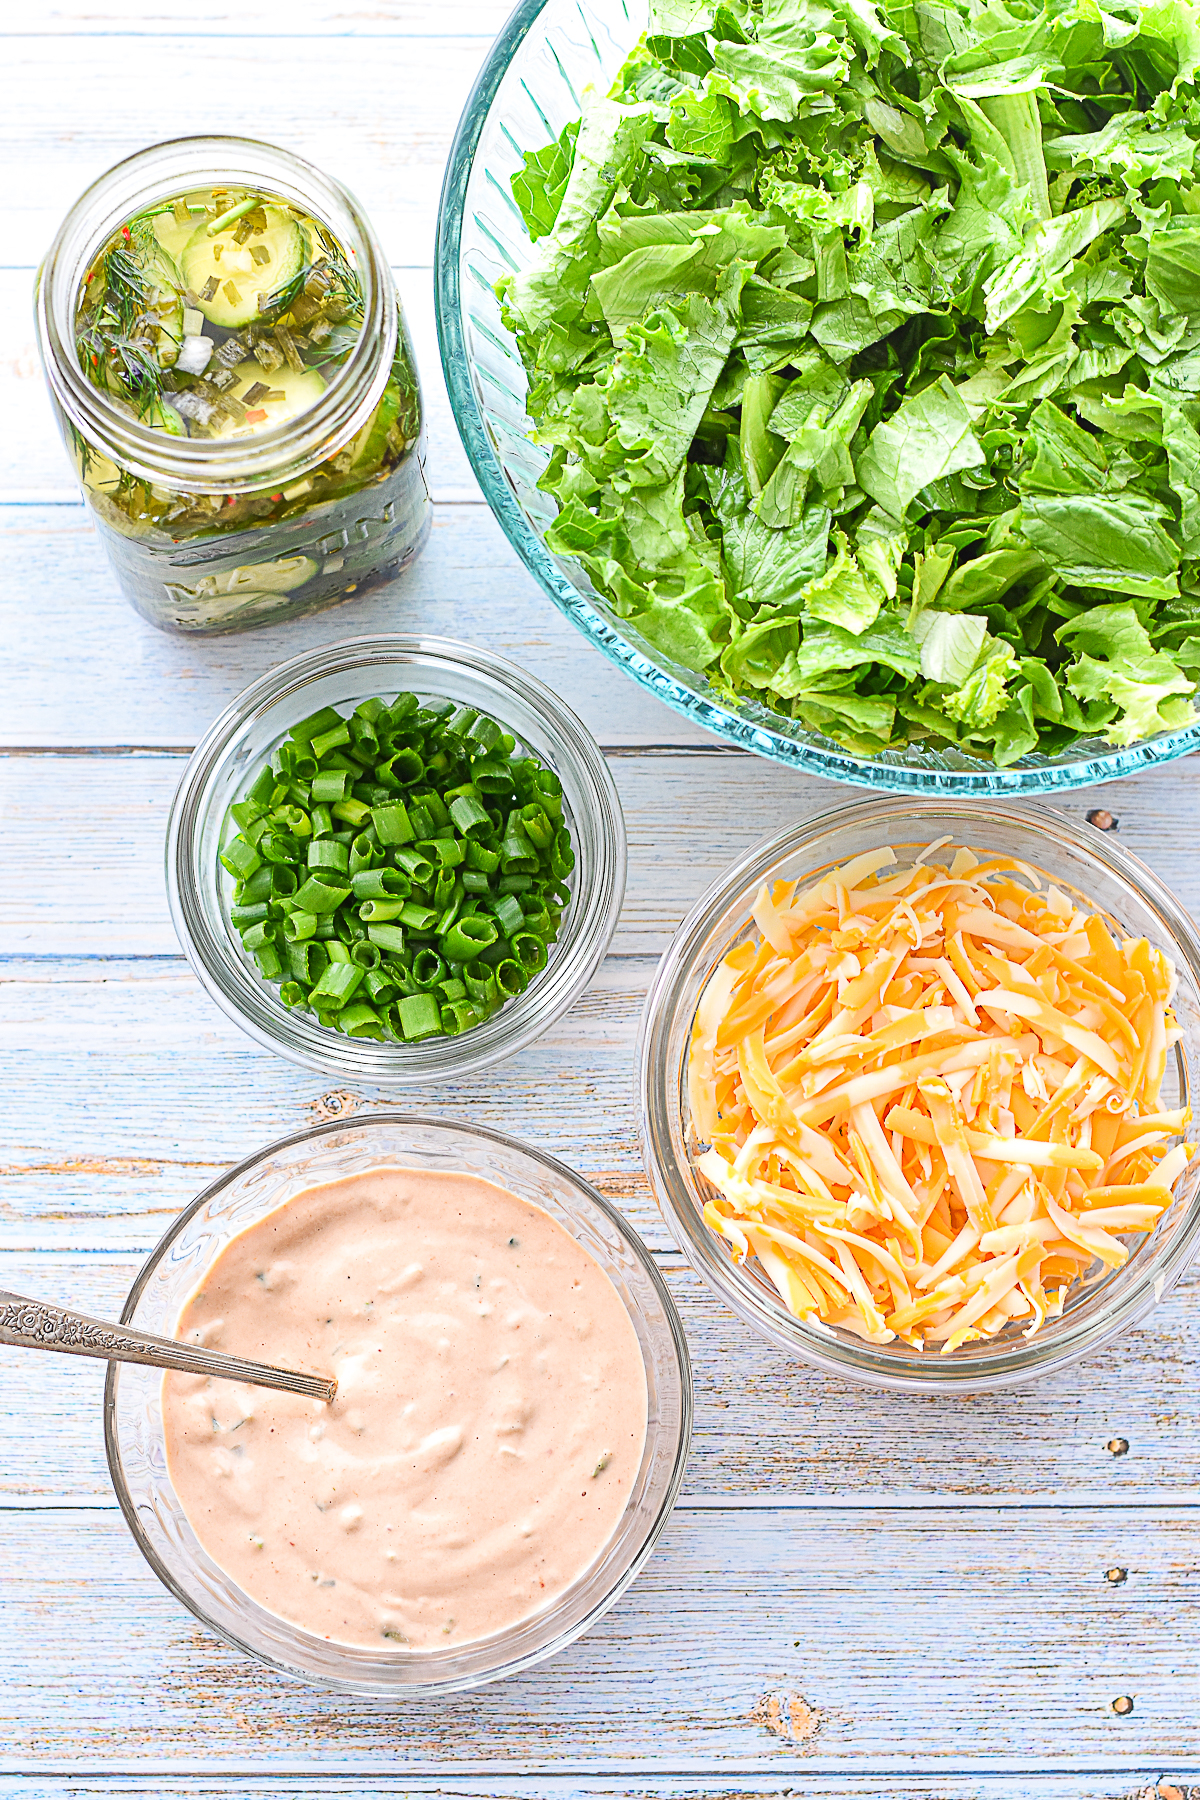 process shot of low FODMAP burger bowl produce and cheese ingredients, including chopped green leaf lettuce, low fodmap pickles, chopped scallions, shredded cheese next to a bowl of burger sauce for dressing